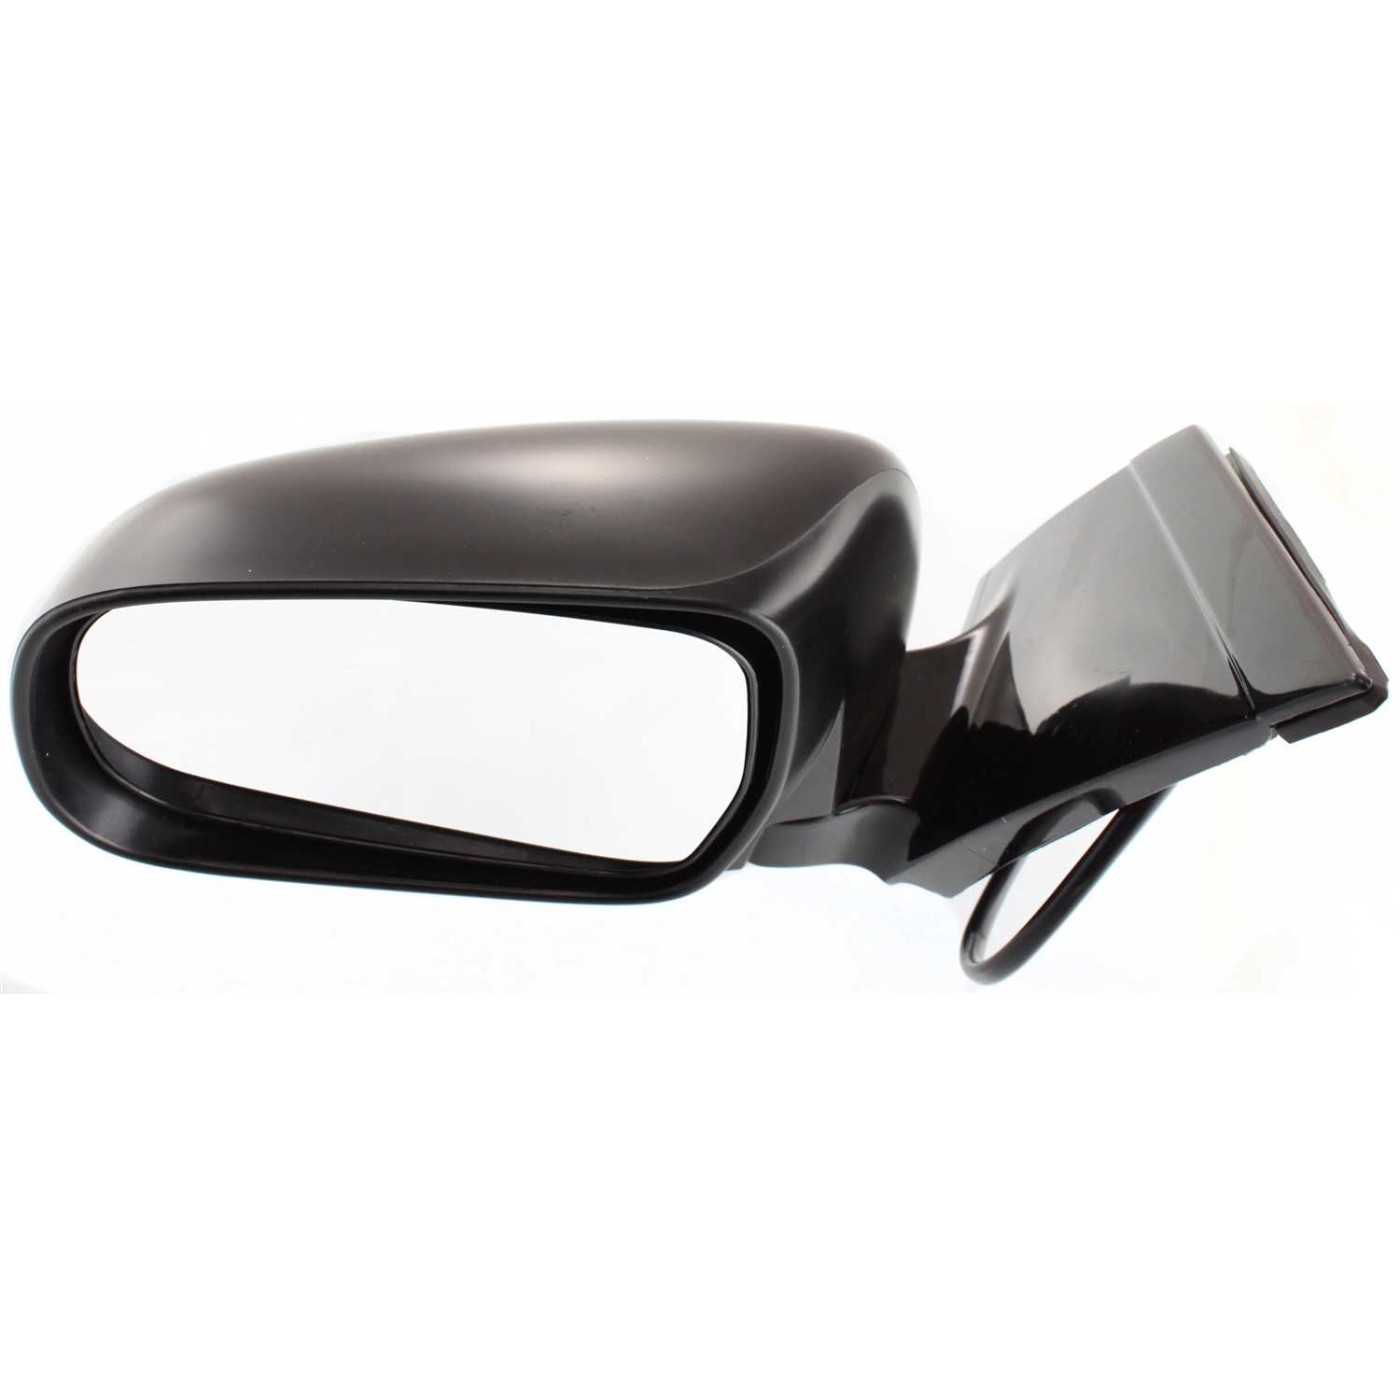 Power Heated Side View Mirror Driver Left LH for Lexus RX330 RX350 RX400H | eBay 2008 Lexus Rx 350 Driver Side Mirror Replacement